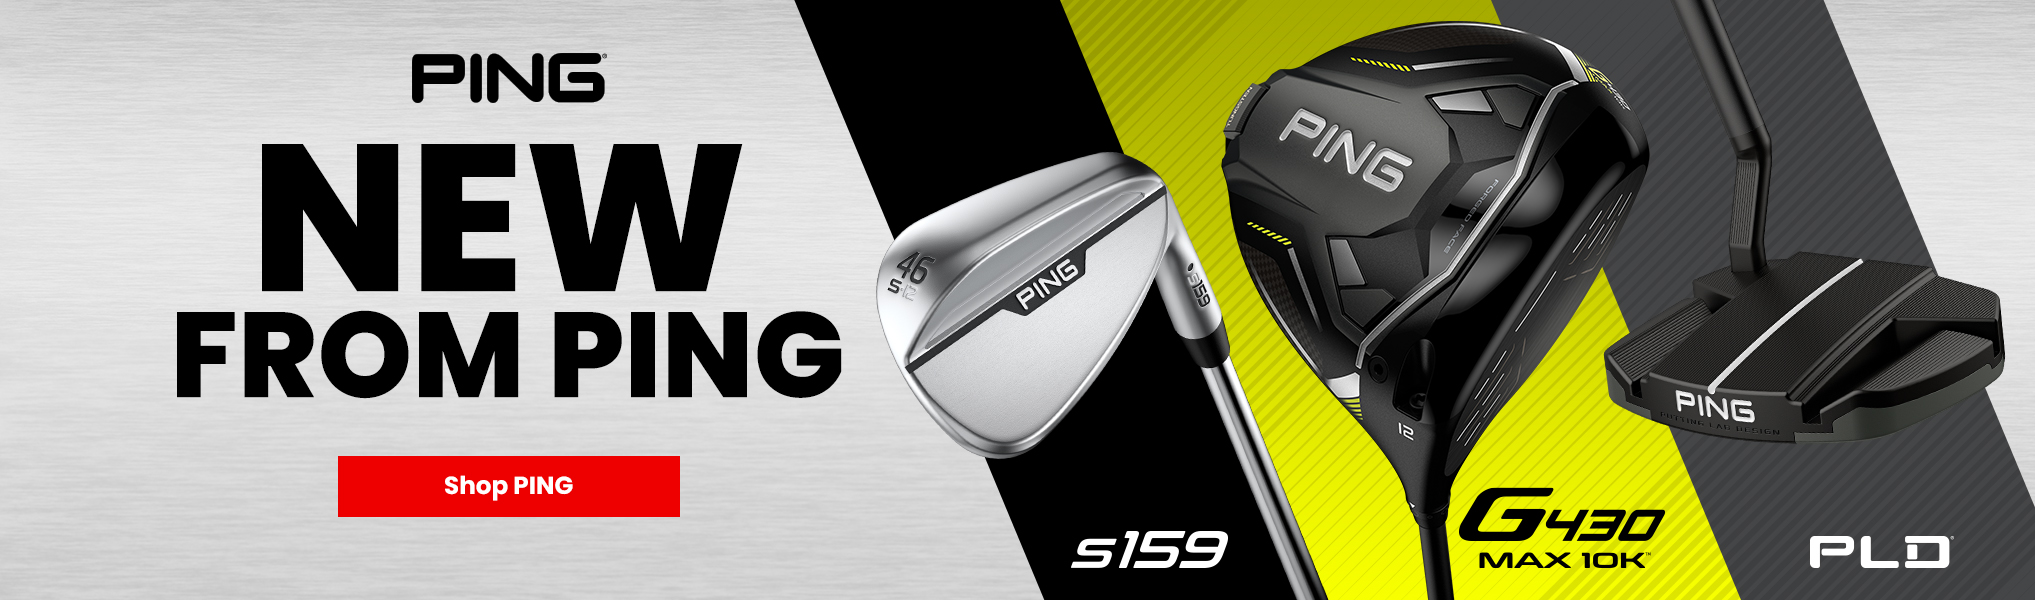 New Ping Golf Clubs